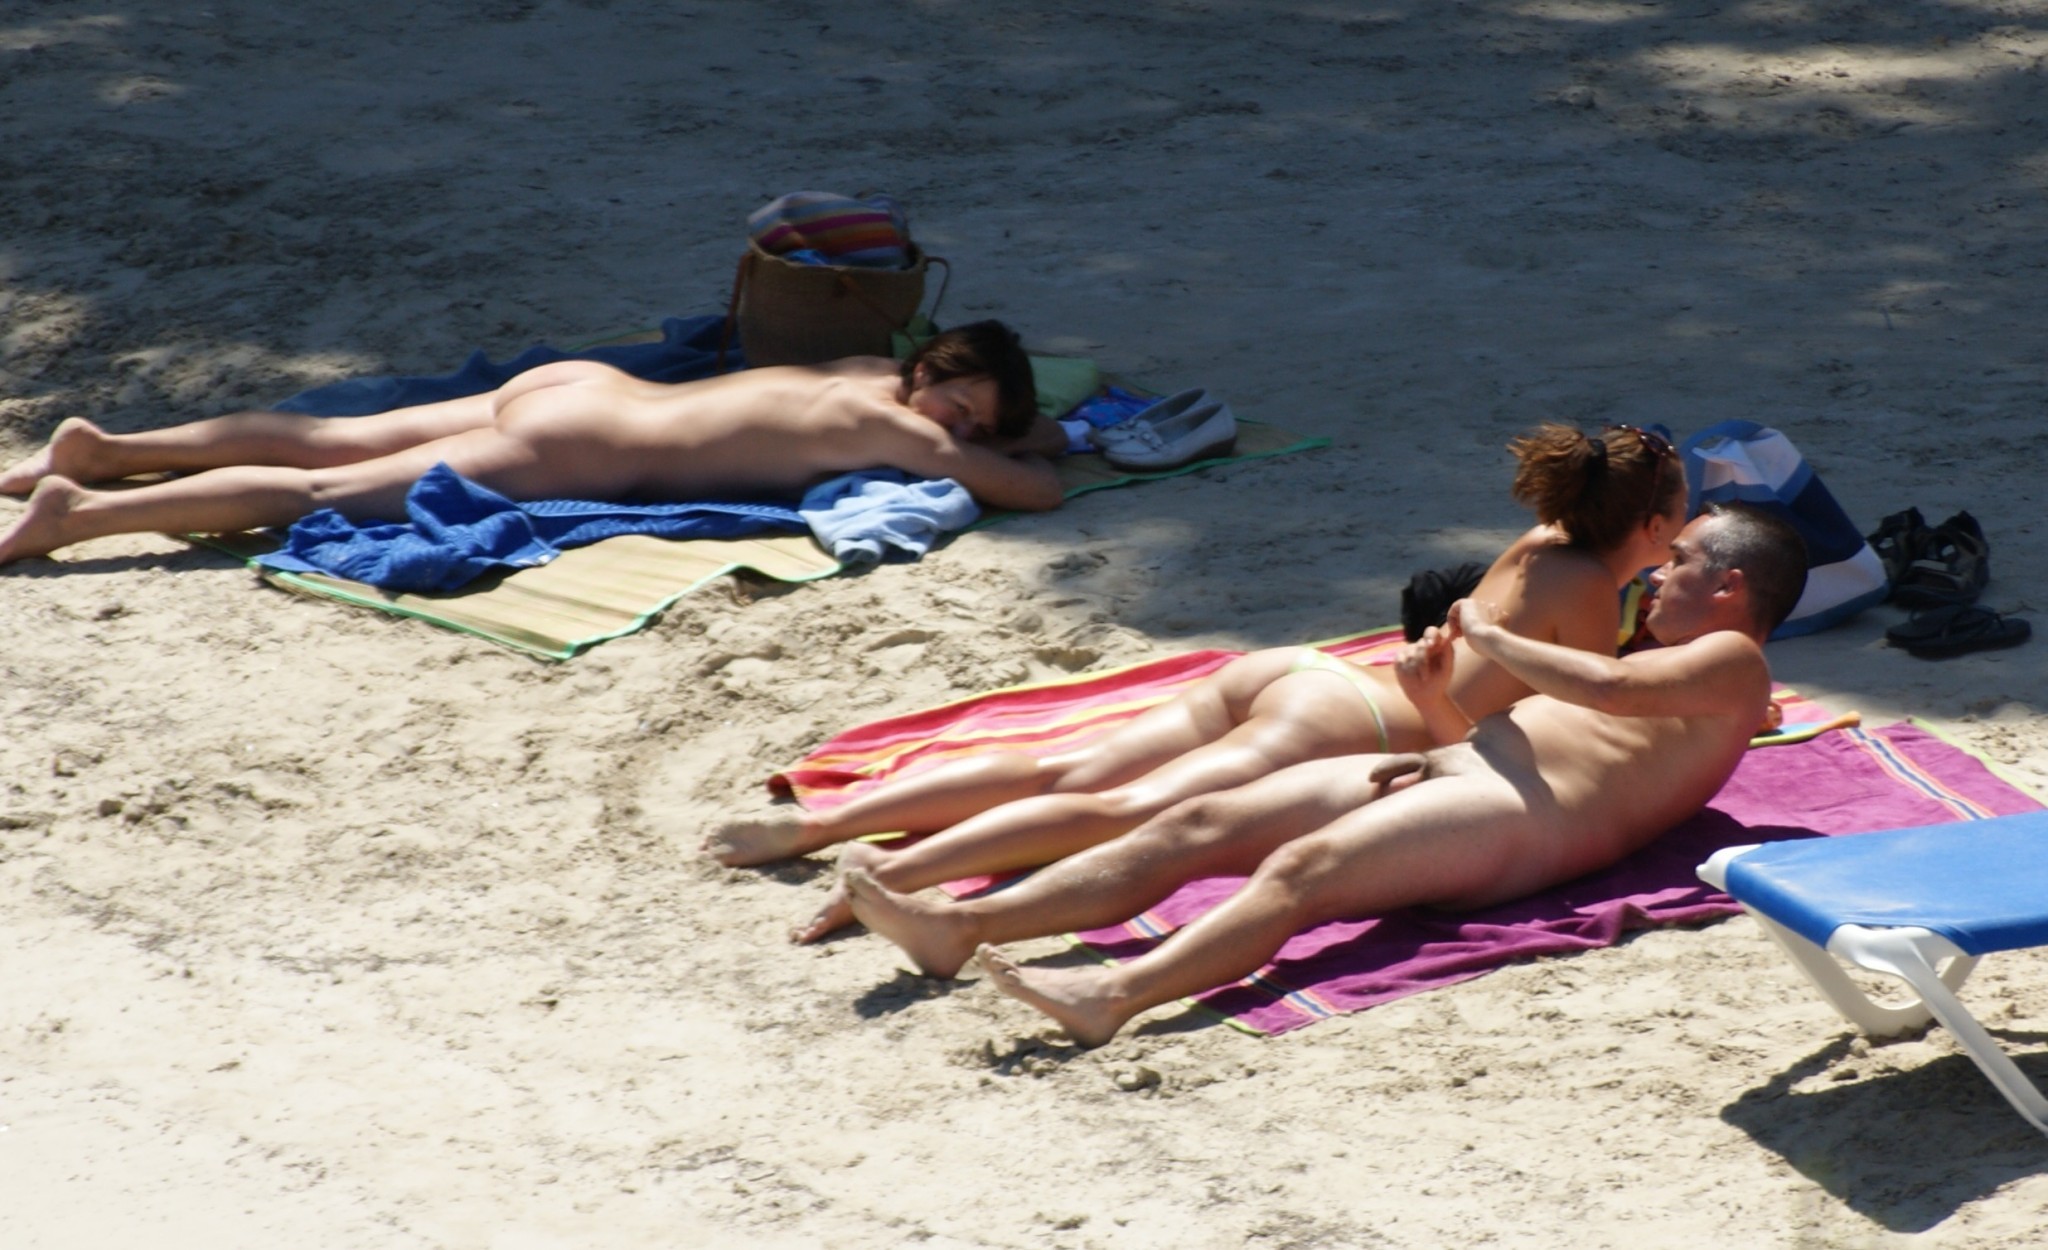 Blonde and brunette nude teens tanning outdoors #72242785